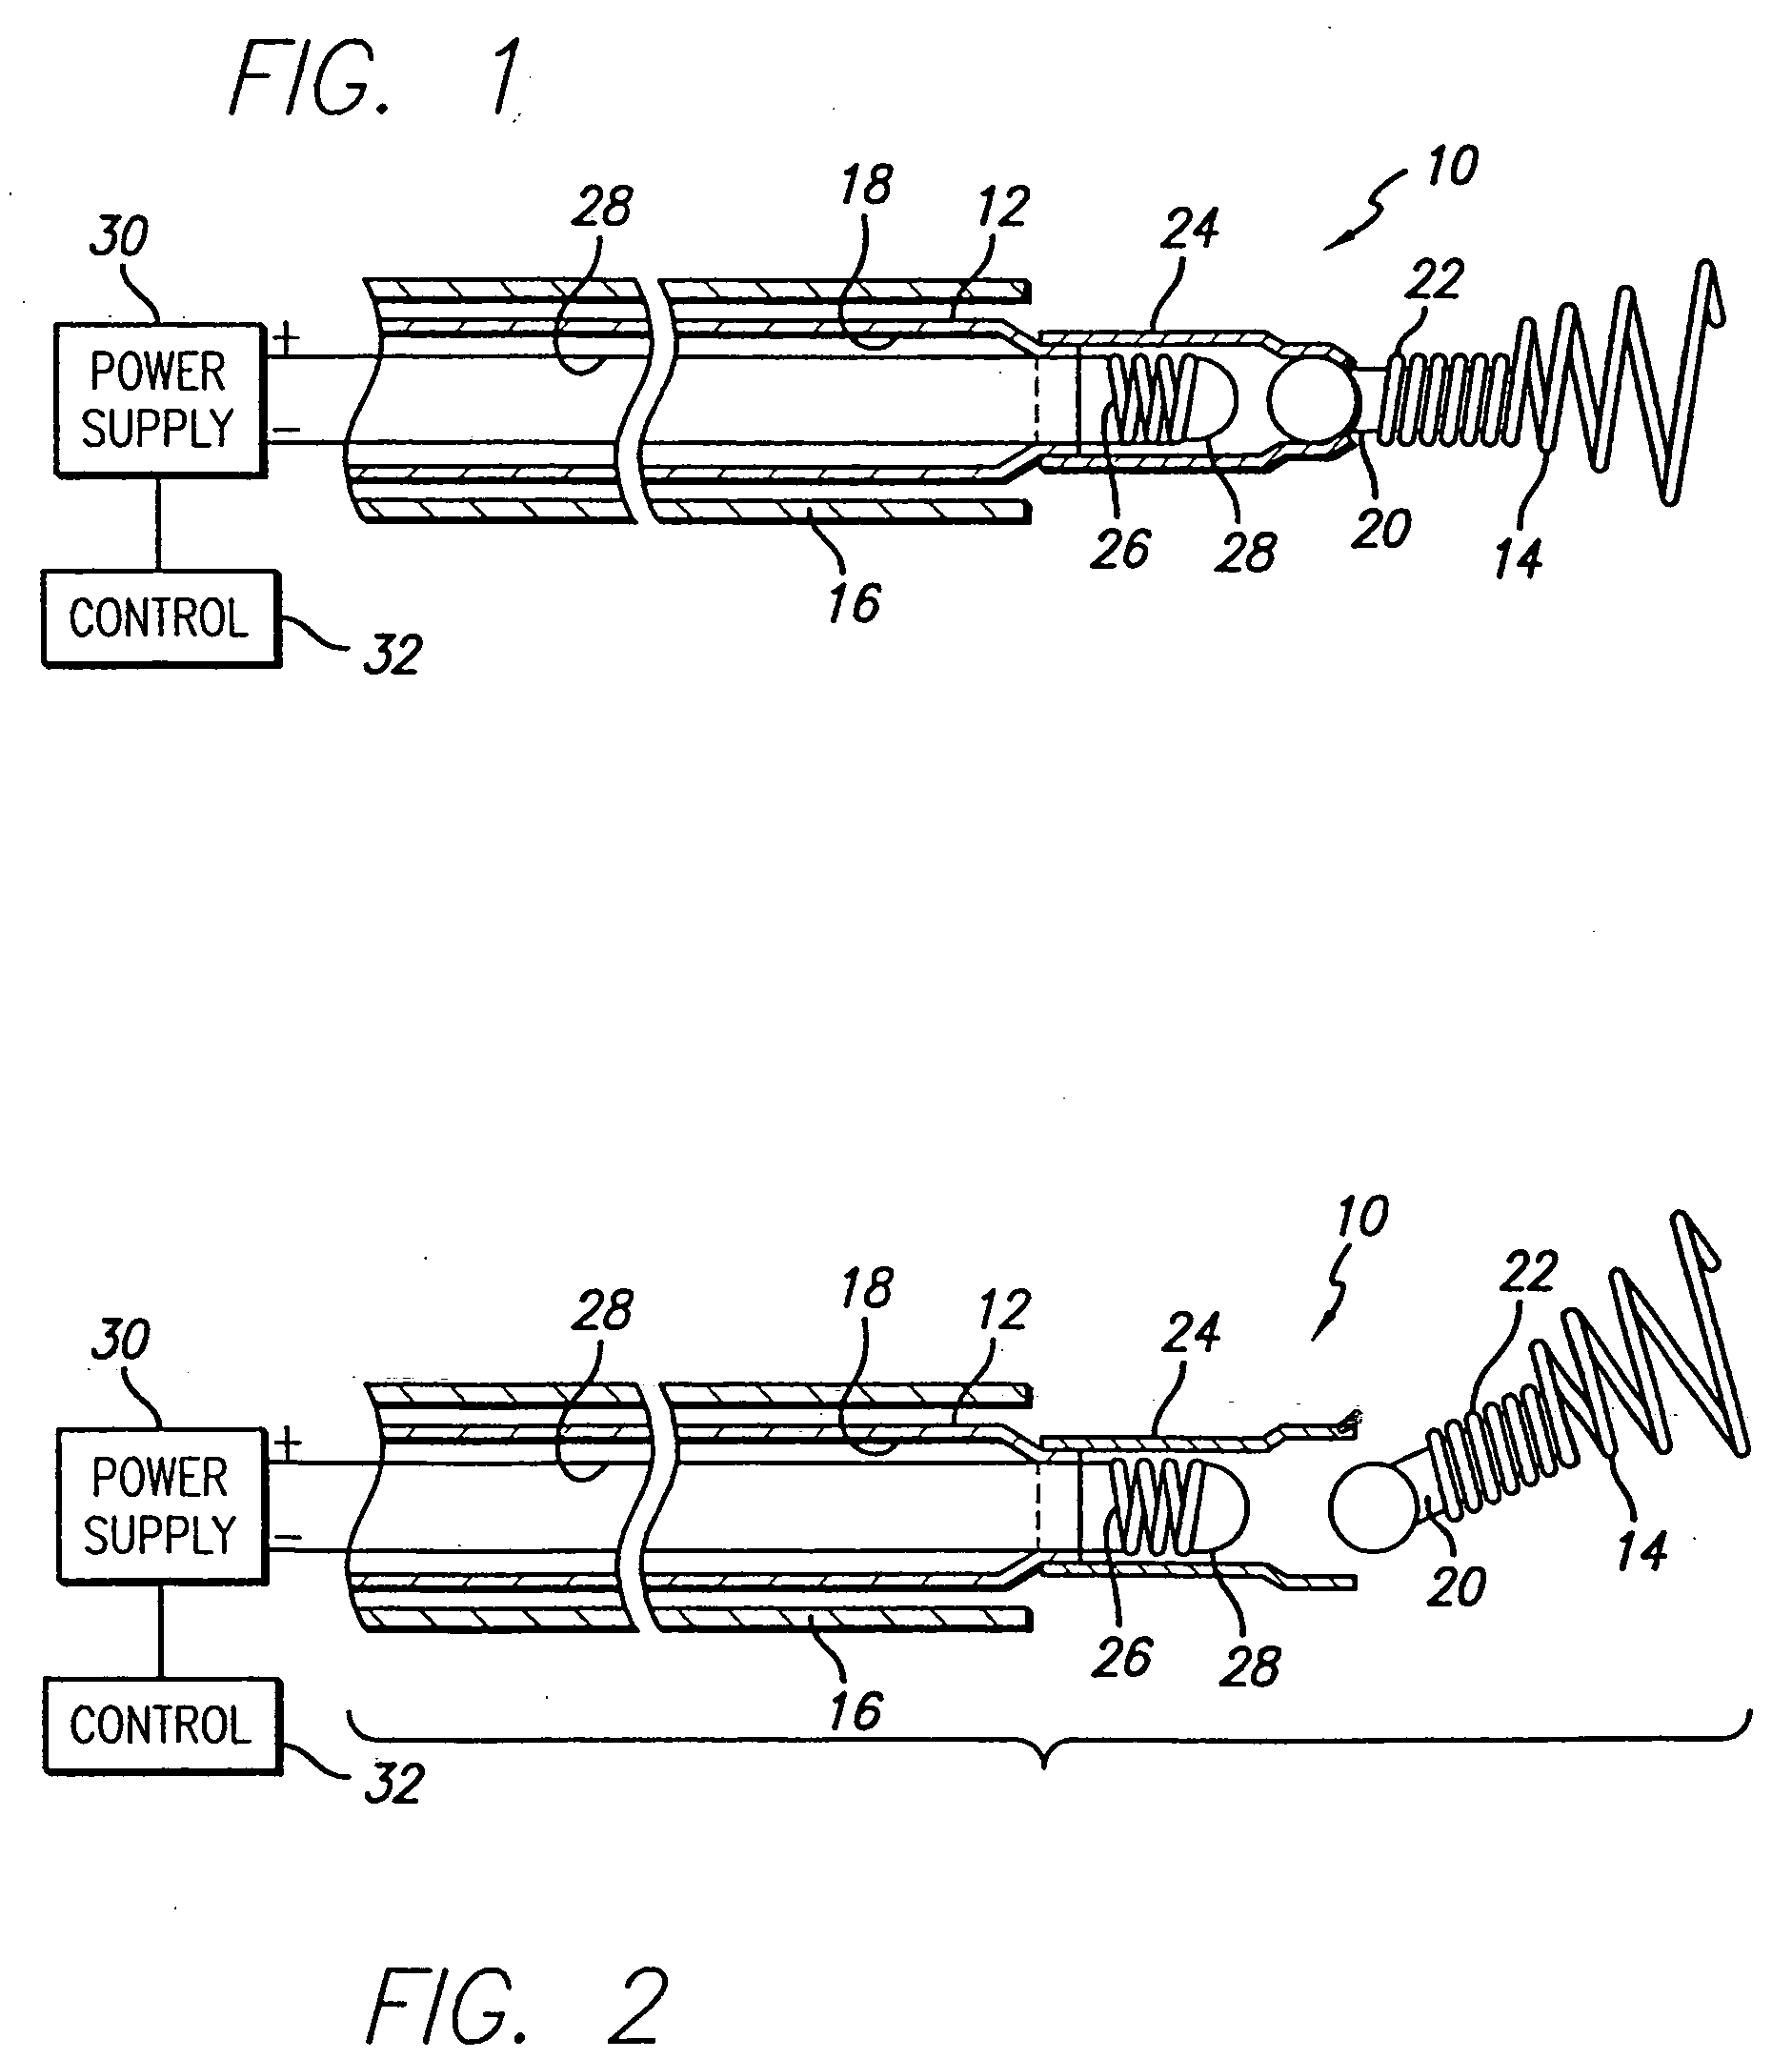 Apparatus for deployment of micro-coil using a catheter